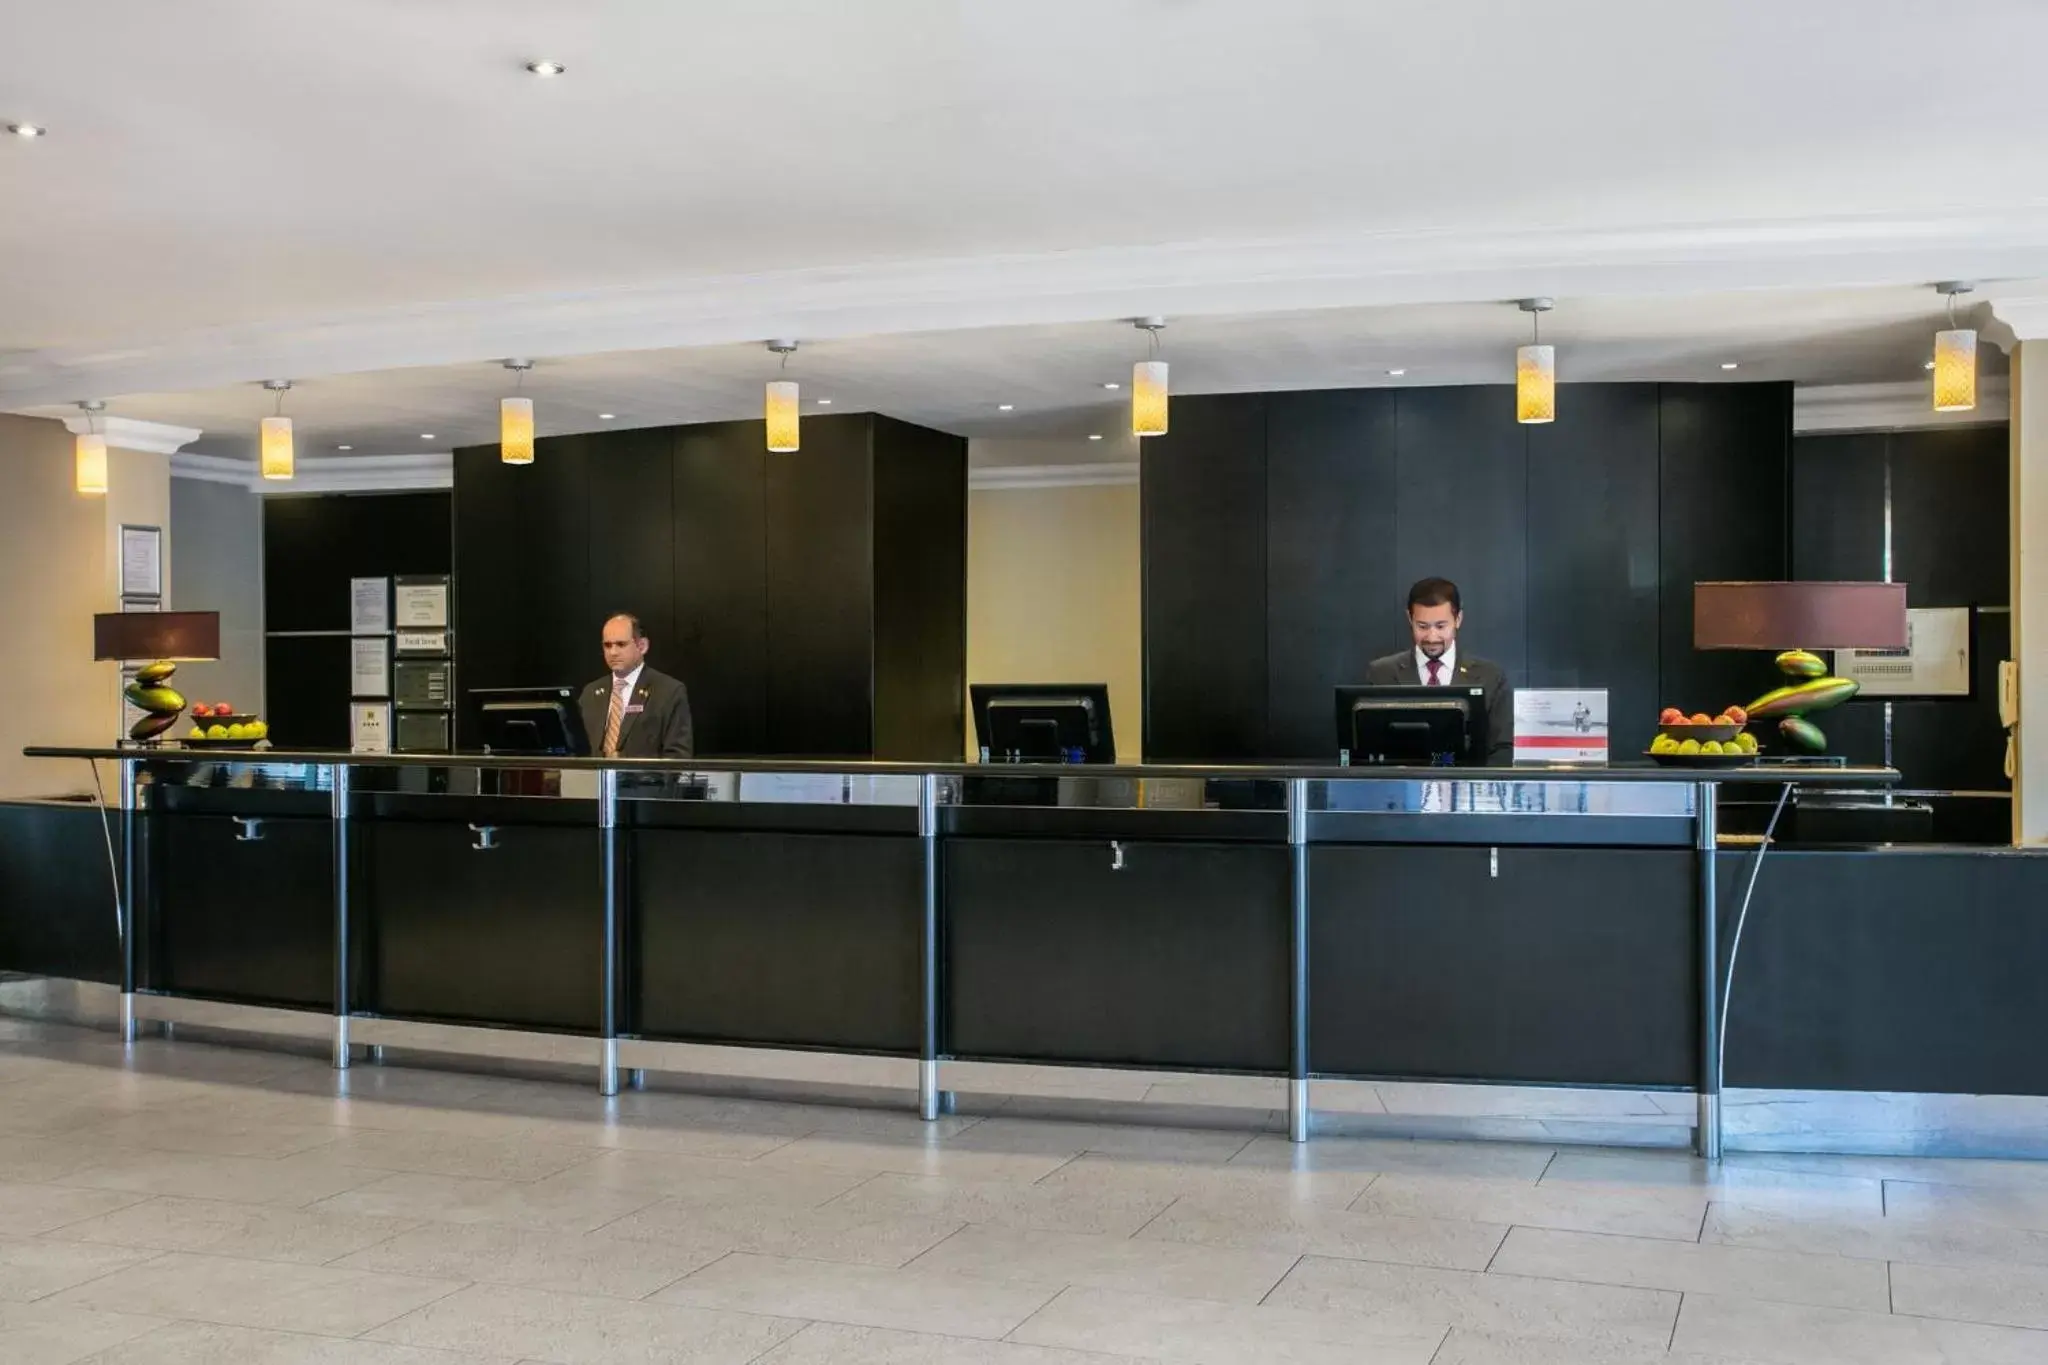 Property building in Crowne Plaza Manchester Airport